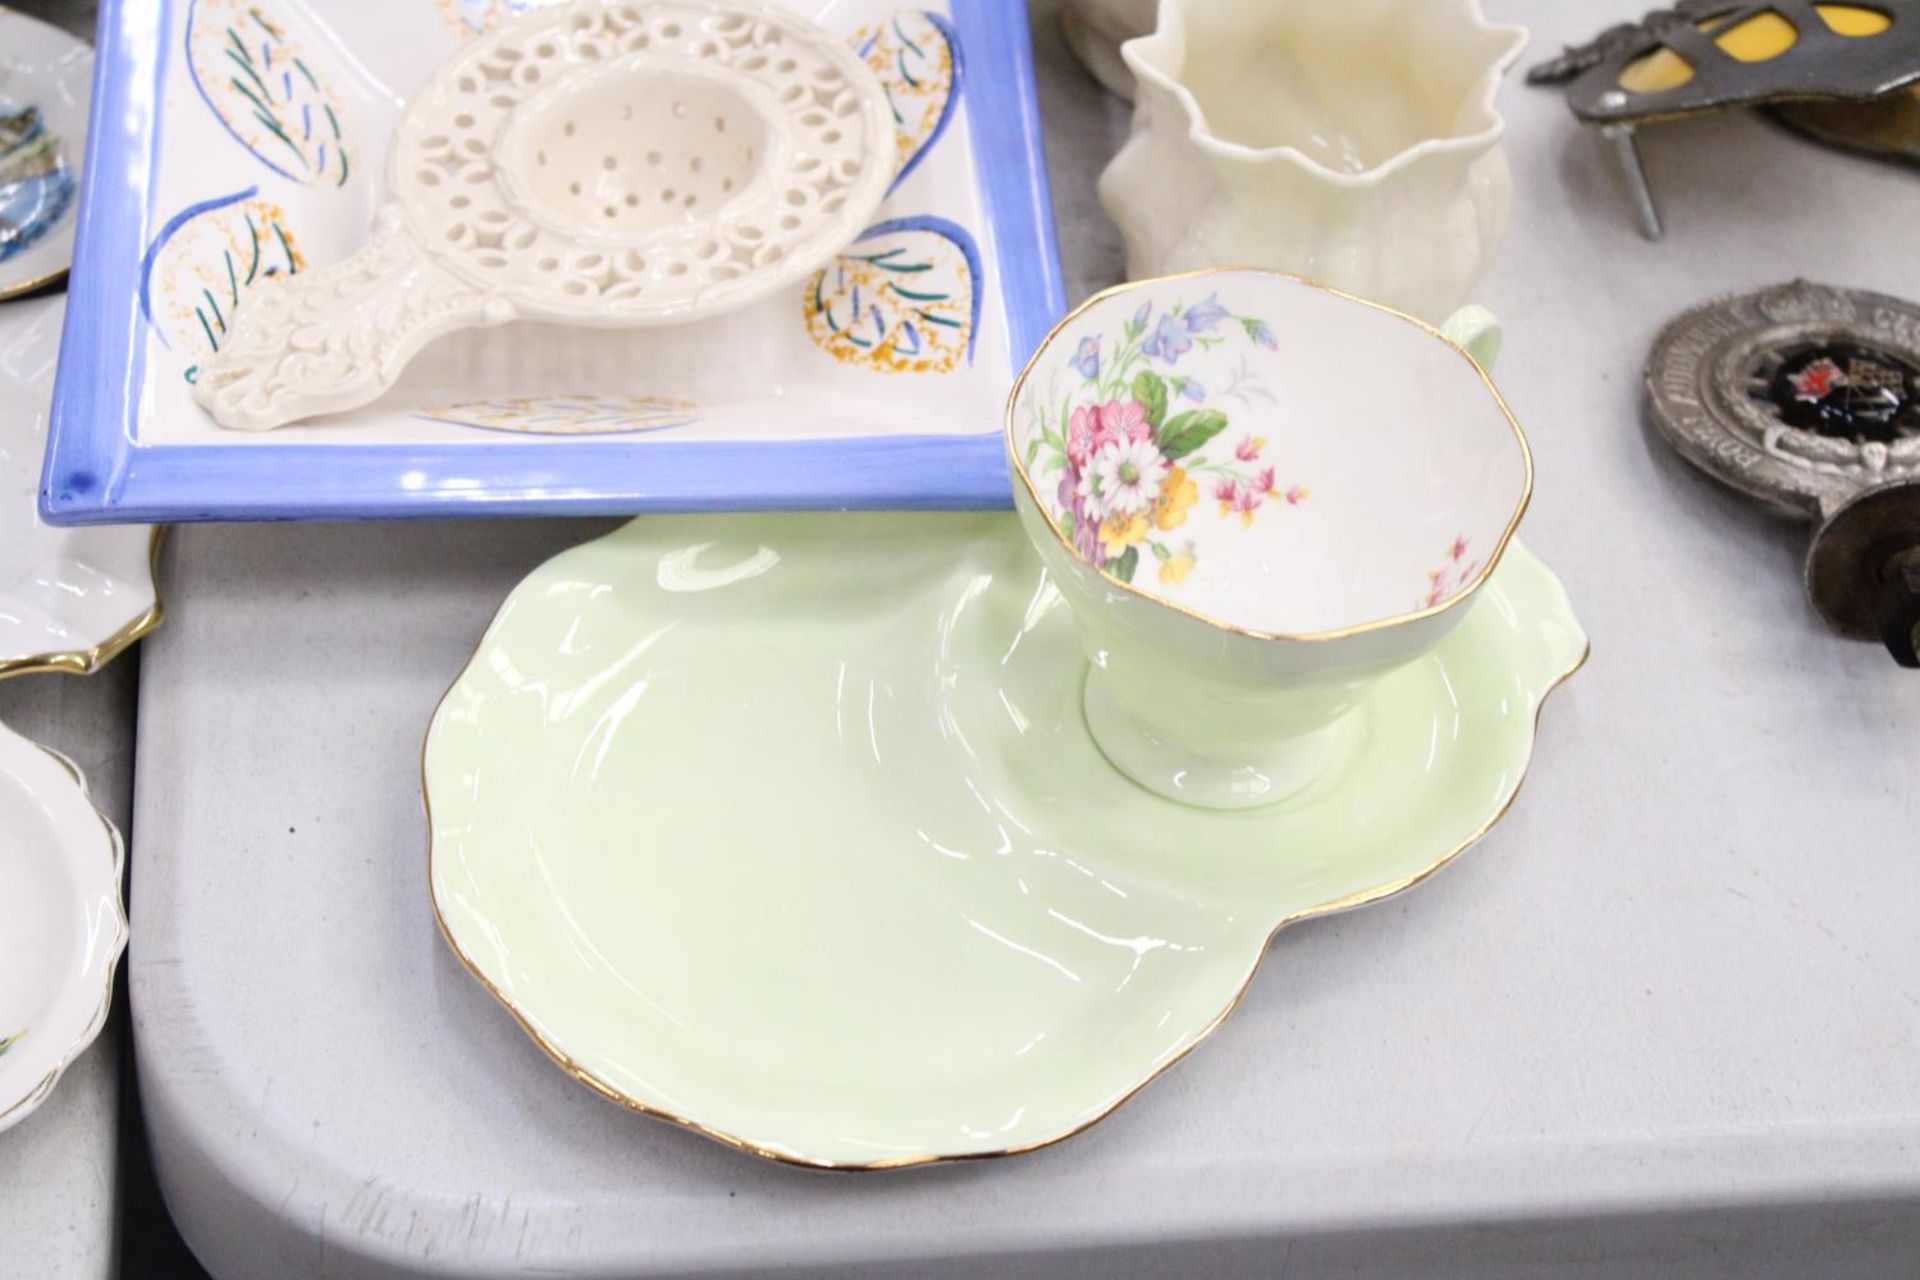 A VINTAGE CHINA FOLET TENNIS CUP AND SAUCER SET PLUS A STUDIO POTTERY SQUARE BOWL - Image 5 of 5